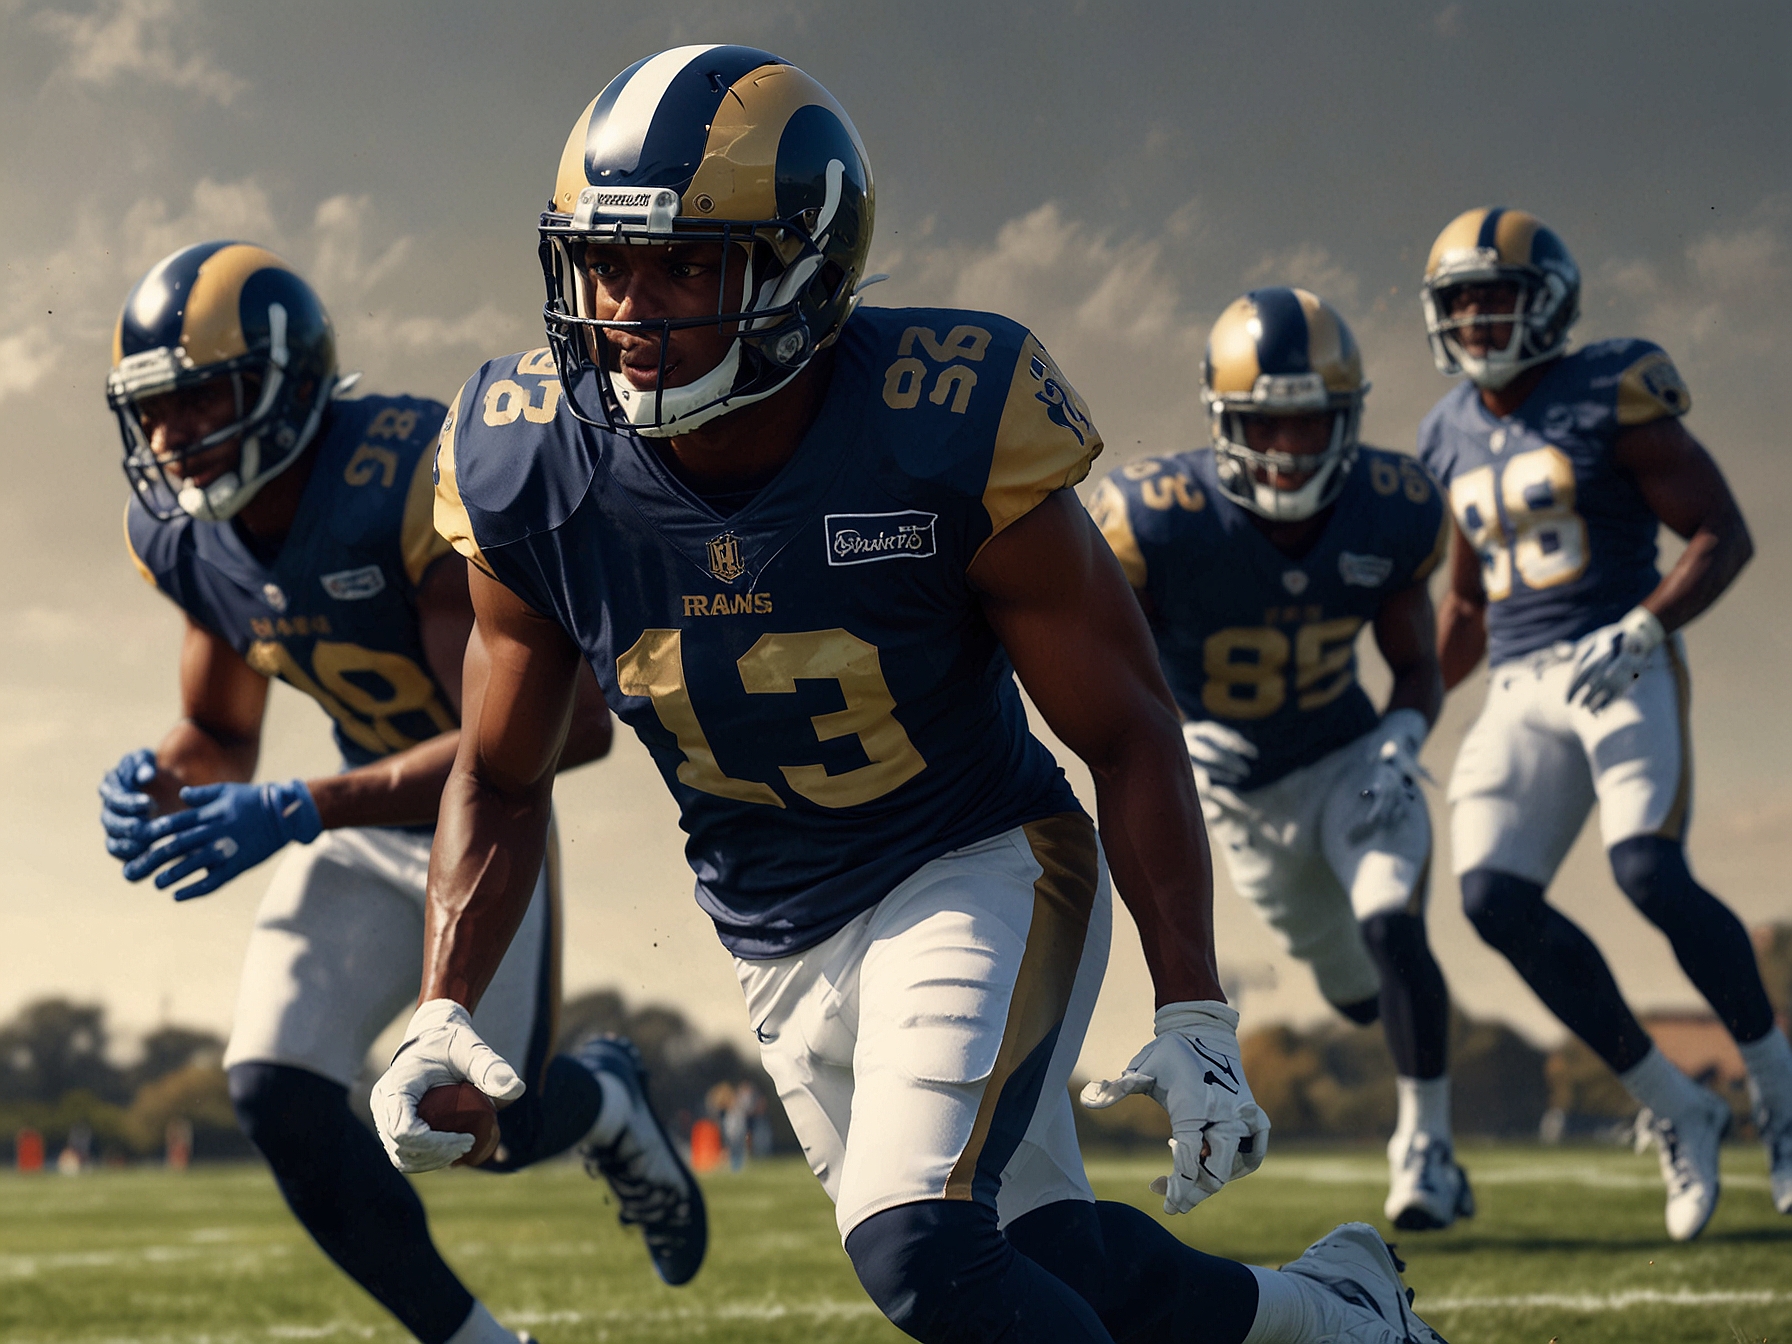 The Los Angeles Rams' wide receiving unit practicing with intense synergy during a training session, showcasing their elevated skills and preparing for the challenges of the upcoming NFL season.